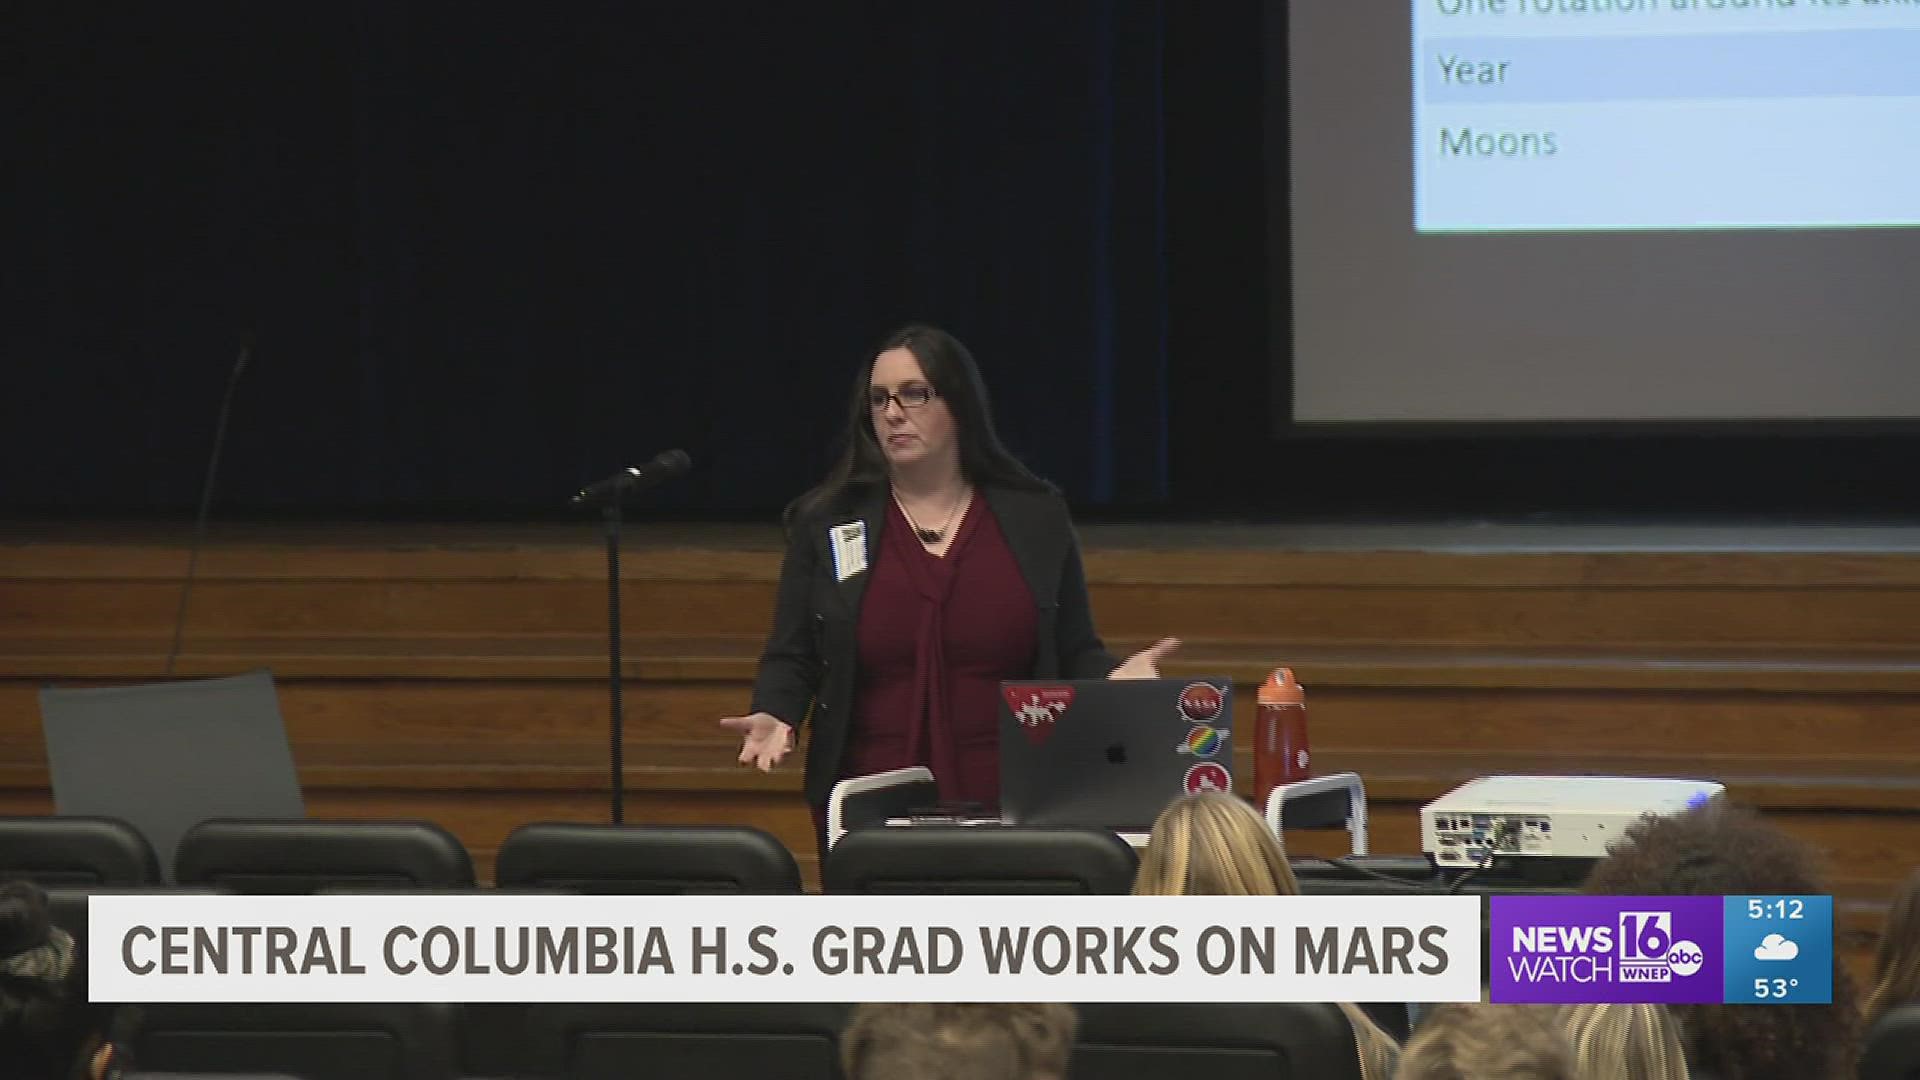 The former student now works with NASA but came back to her alma mater to speak with science students.